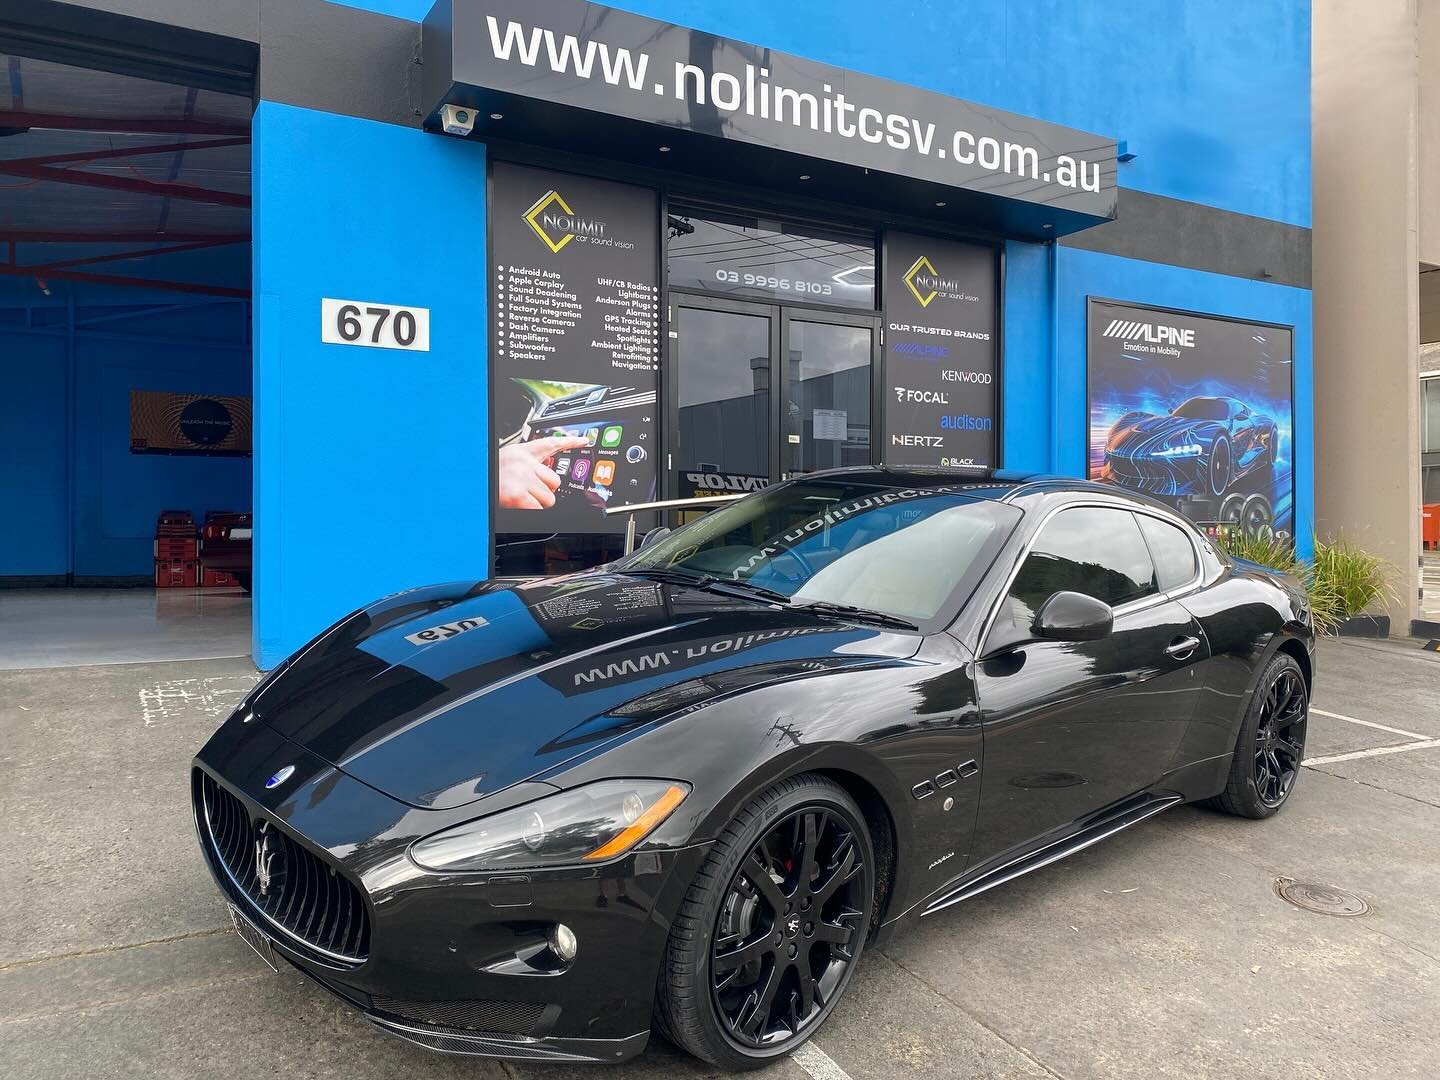 This custom head unit installation looks amazing. Take a look at our new head unit upgrade for Maserati Gran Turismos!

We completed this custom installation of an Alpine I-905 in this Maserati Gran Turismo. We custom designed and built the fascia, a